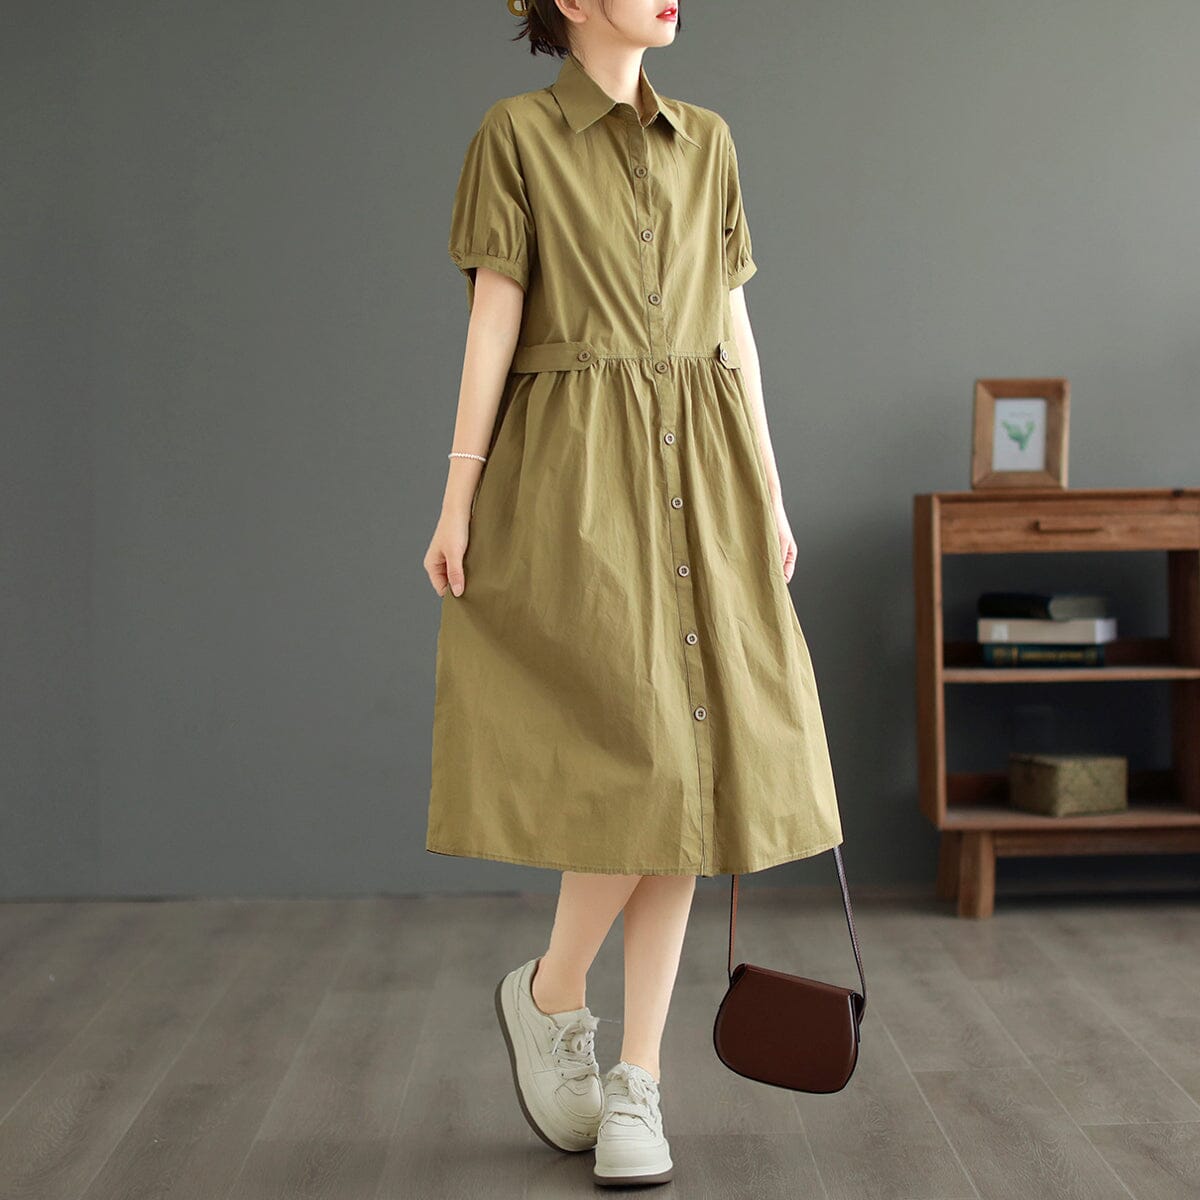 Summer Casual Loose Solid Cotton Dress